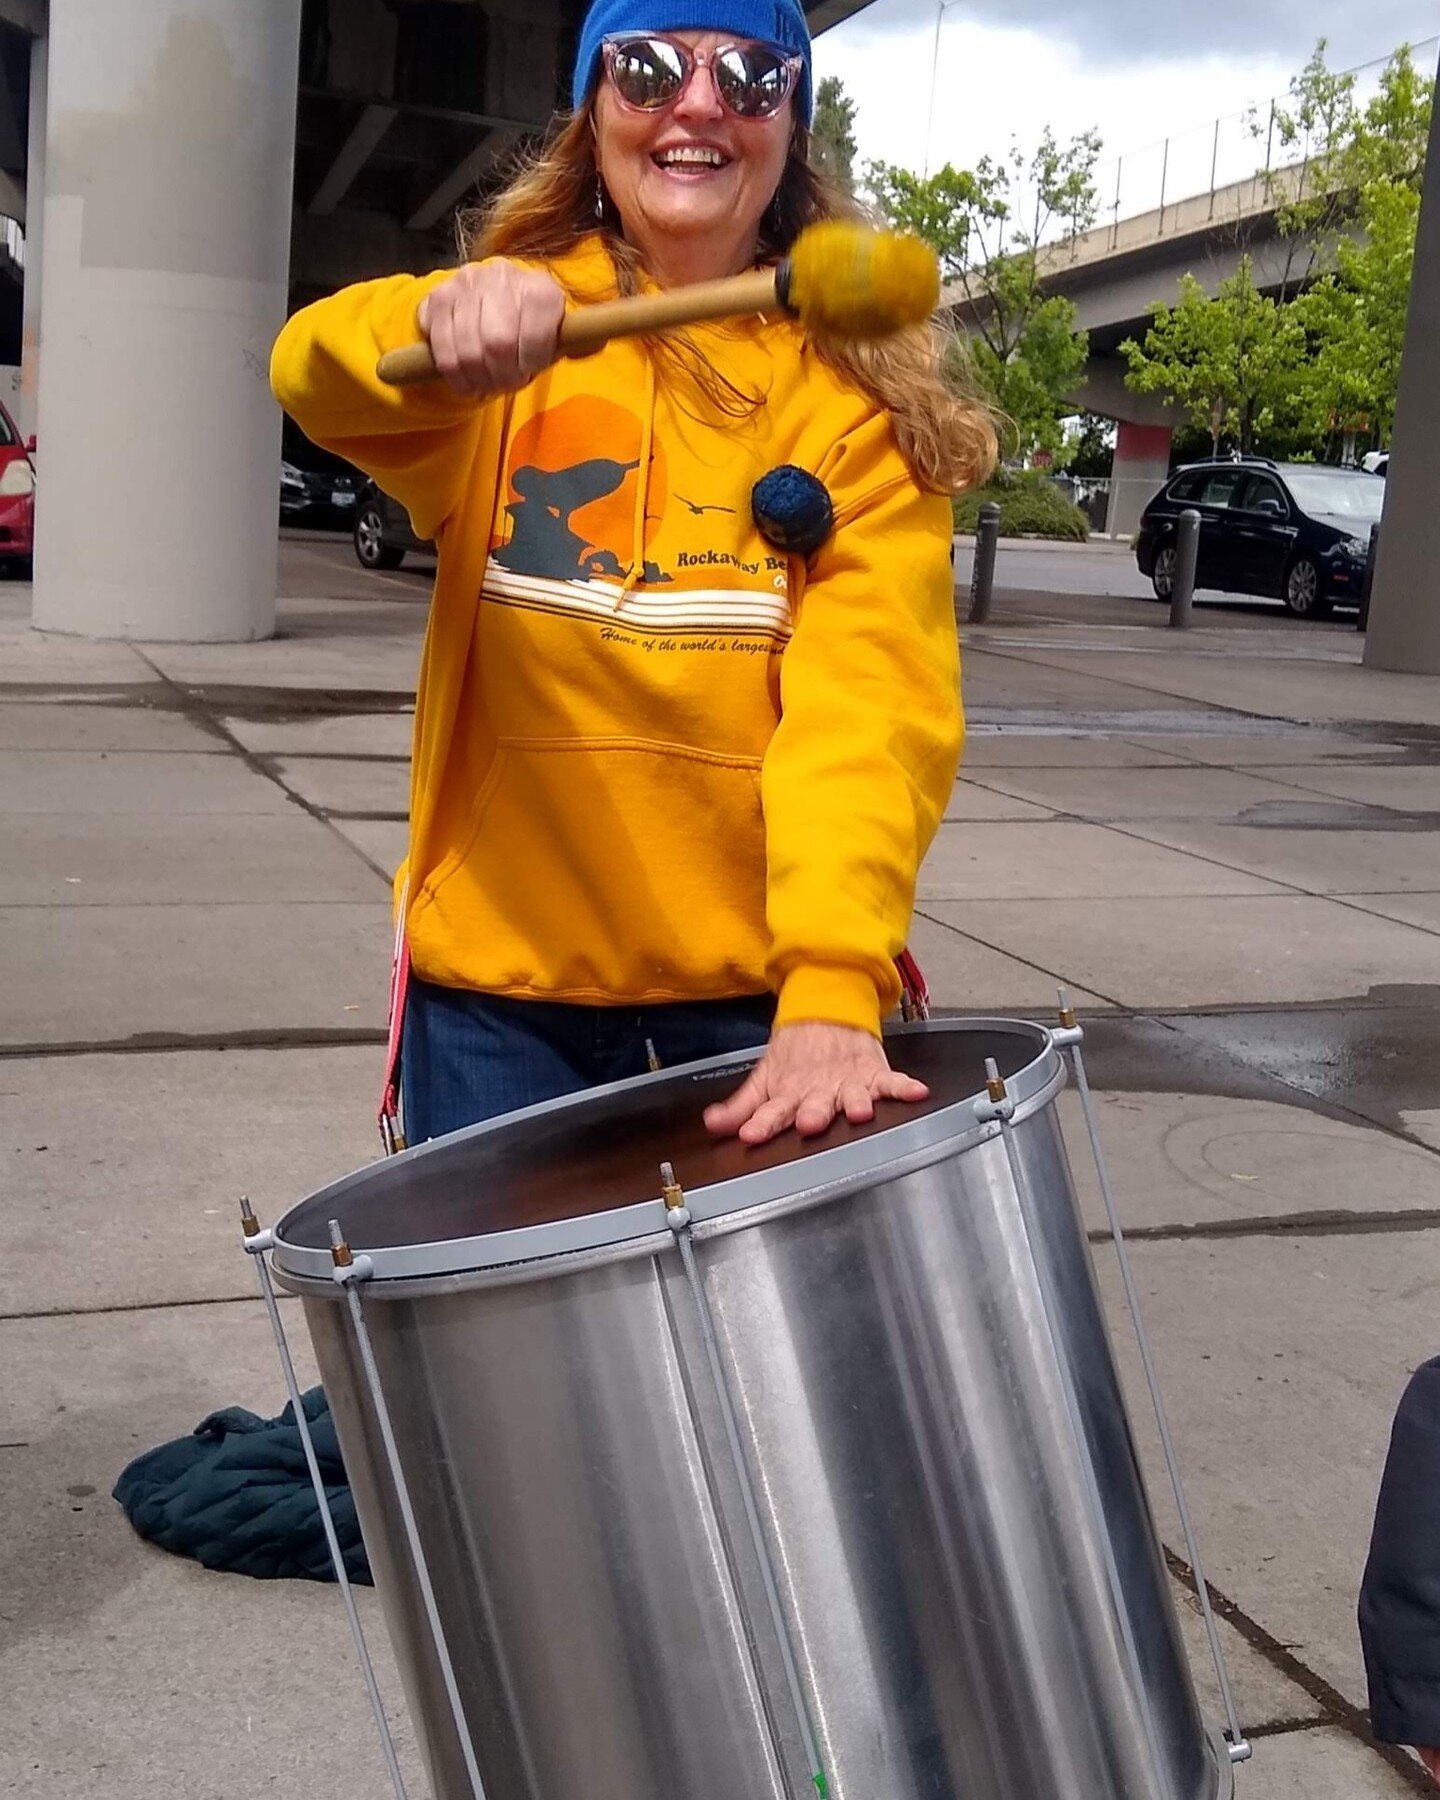 Happy Janis in her Portland Samba colors!
💛💙💛
Portland Samba teaches a class every Saturday at 11AM!
💙💛💙
Drums provided!
Beginners to advanced.
💛💙💛
At the Portland Parks Community Music Center. 
3350 SE Francis St, Portland, OR 97202
💙💛💙
